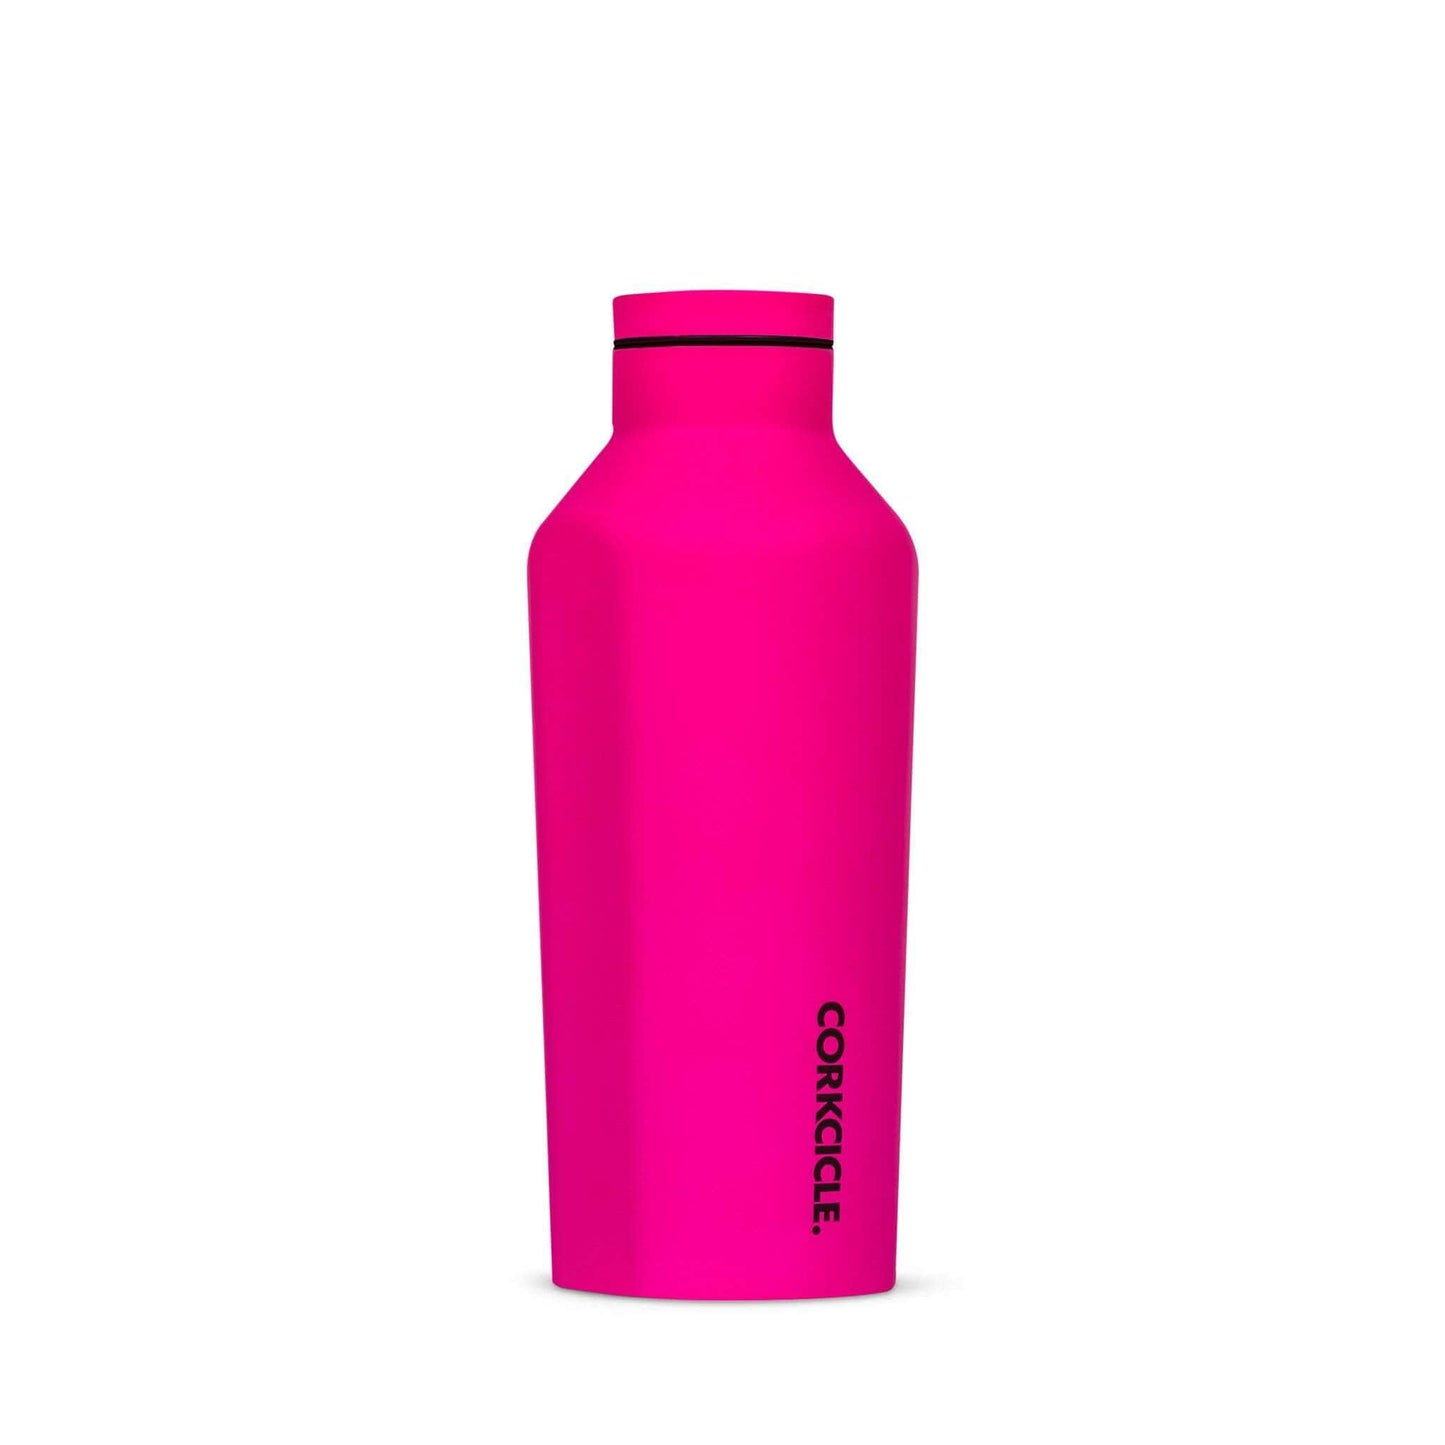 Corkcicle Water Bottles Neon Pink 9oz/270ml Corkcicle Canteen - Insulated Bottle - Neon Lights Collection